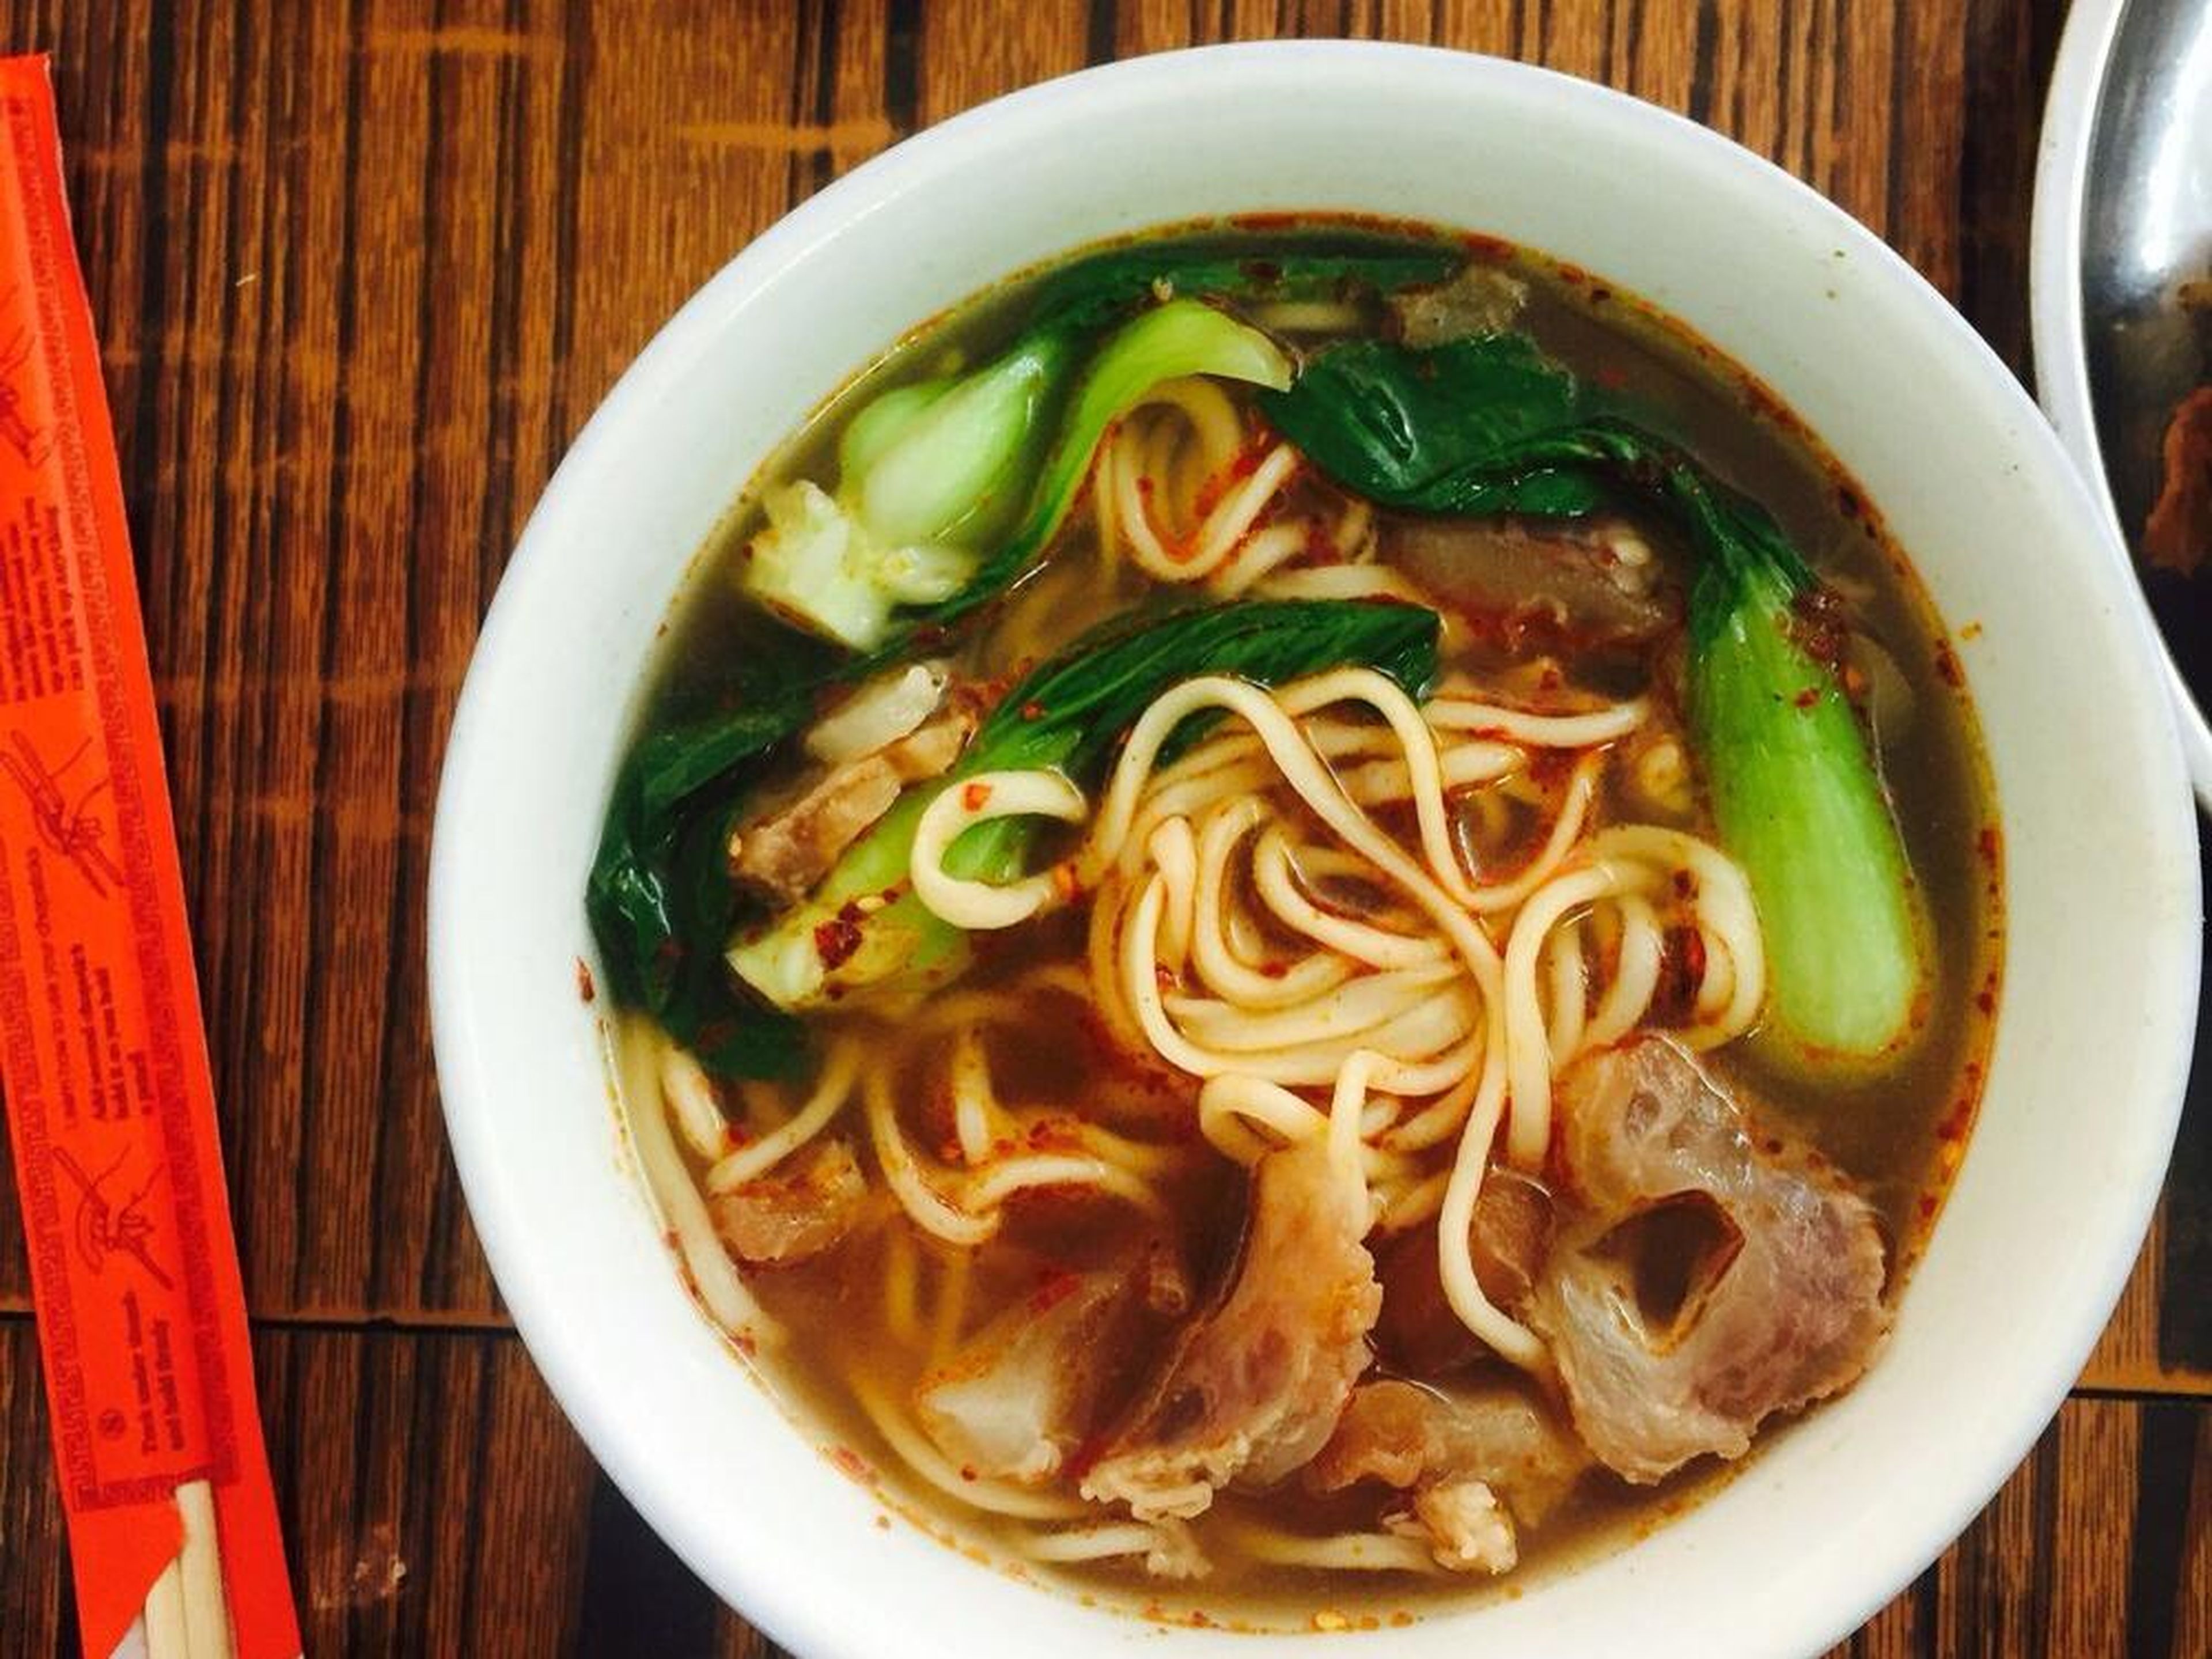 Nisha Stickles, Production Coordinator at Business Insider Today, says noodle soup is a staple in her home city of Bangkok.